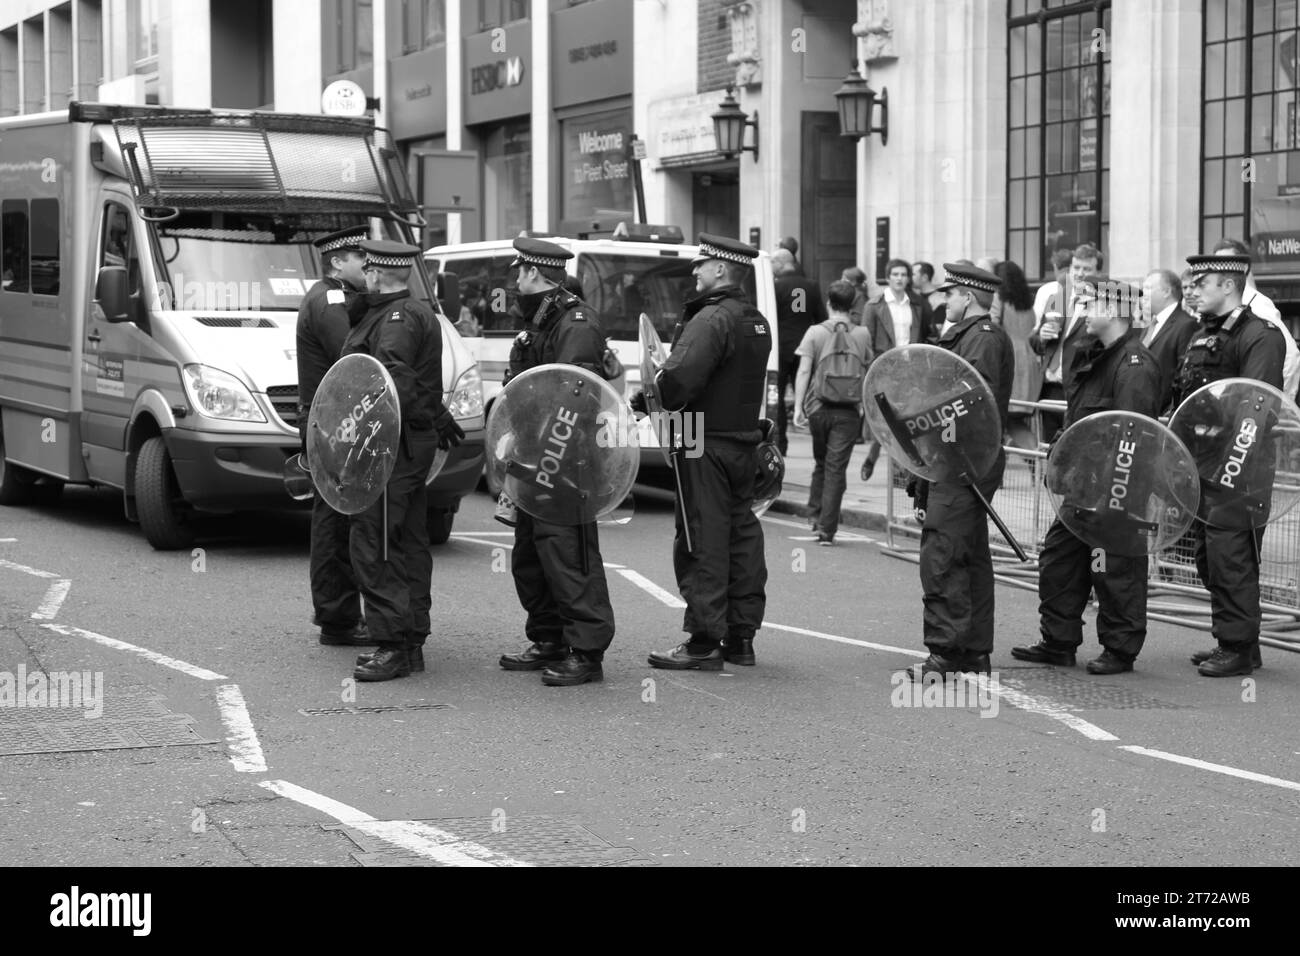 Police on duty in Fleet street, central London. Black and white image of uniform Metropolitan police preparing for crowd control of a demonstration, protest. Streets. London. Stock Photo